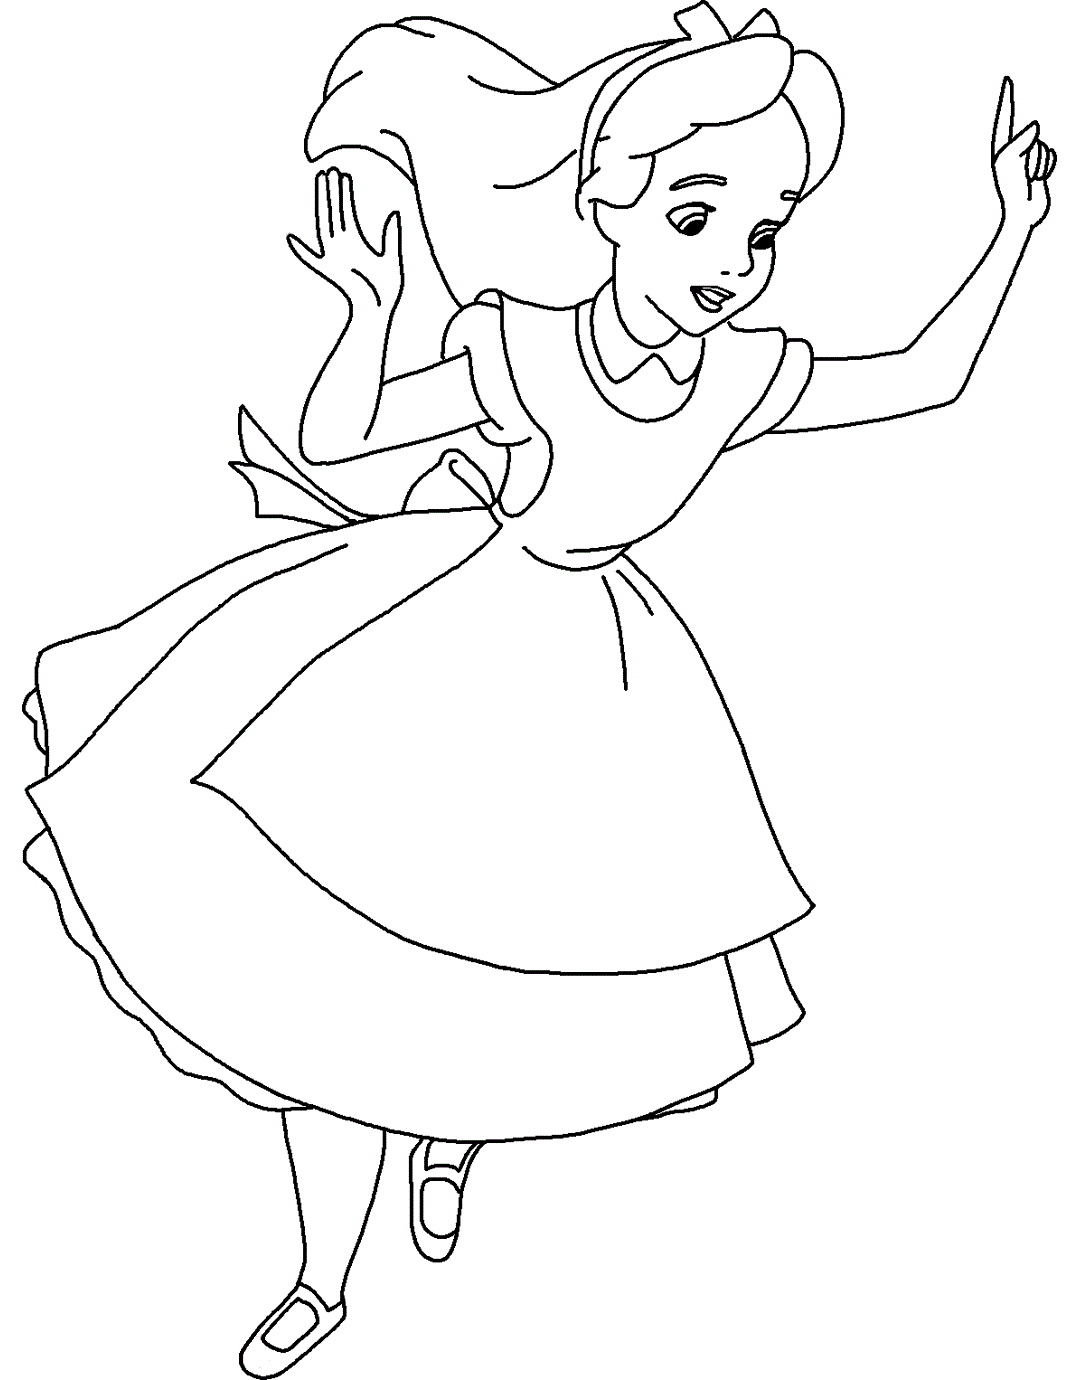 Alice In Wonderland Coloring Pages - Free Printable Coloring Pages for Kids